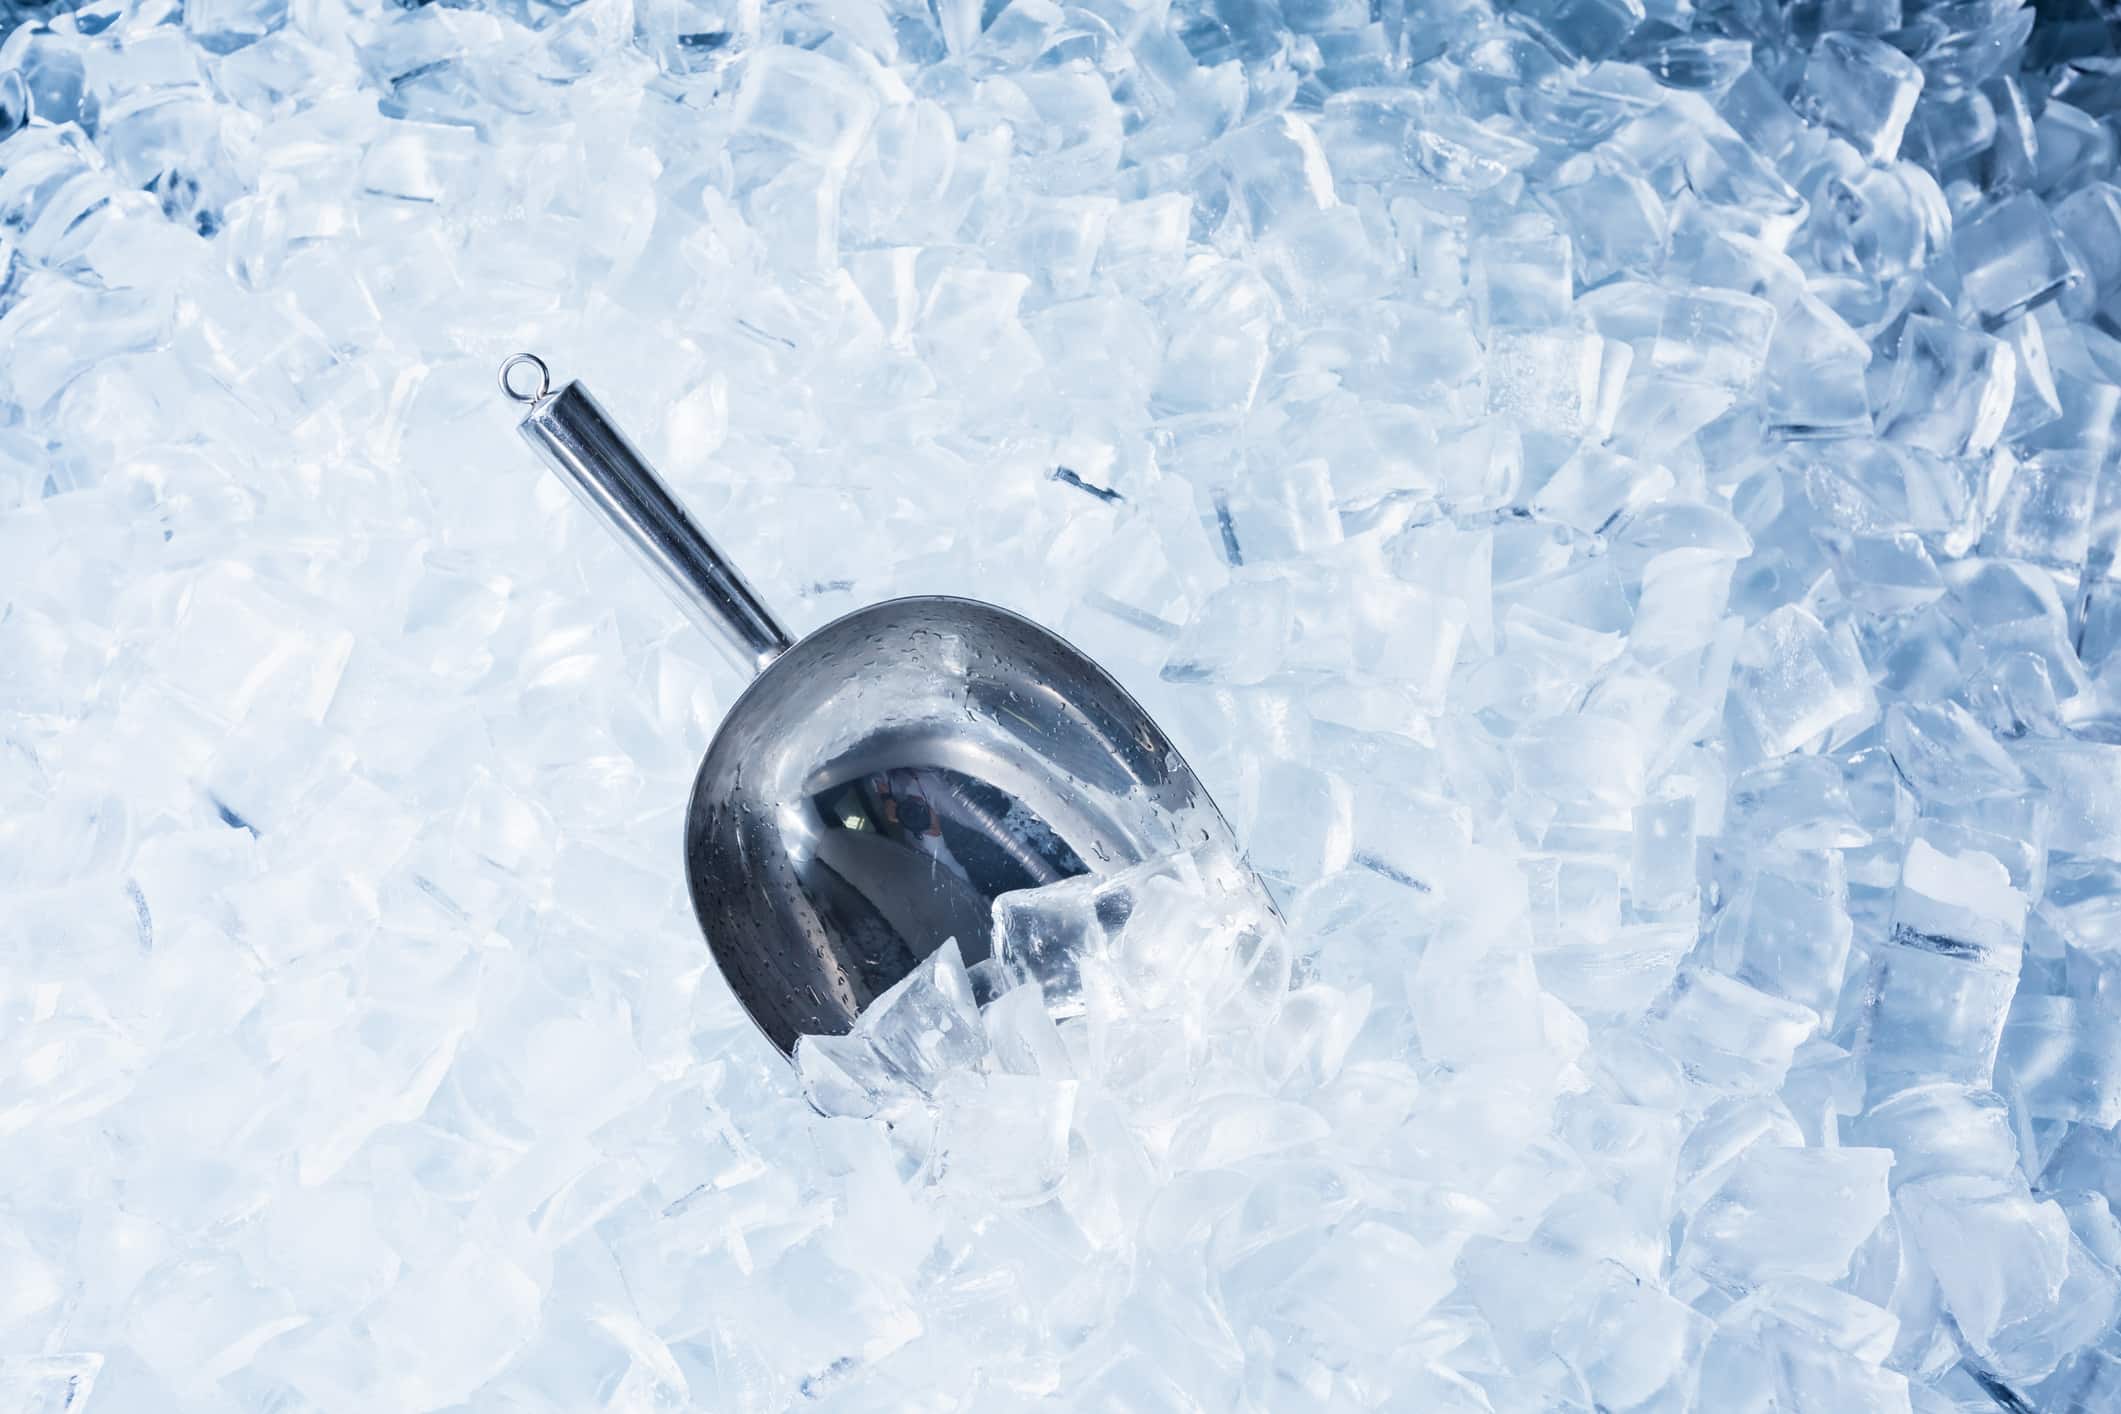 RECALL: Nugget ice machine sold on  could be a laceration hazard